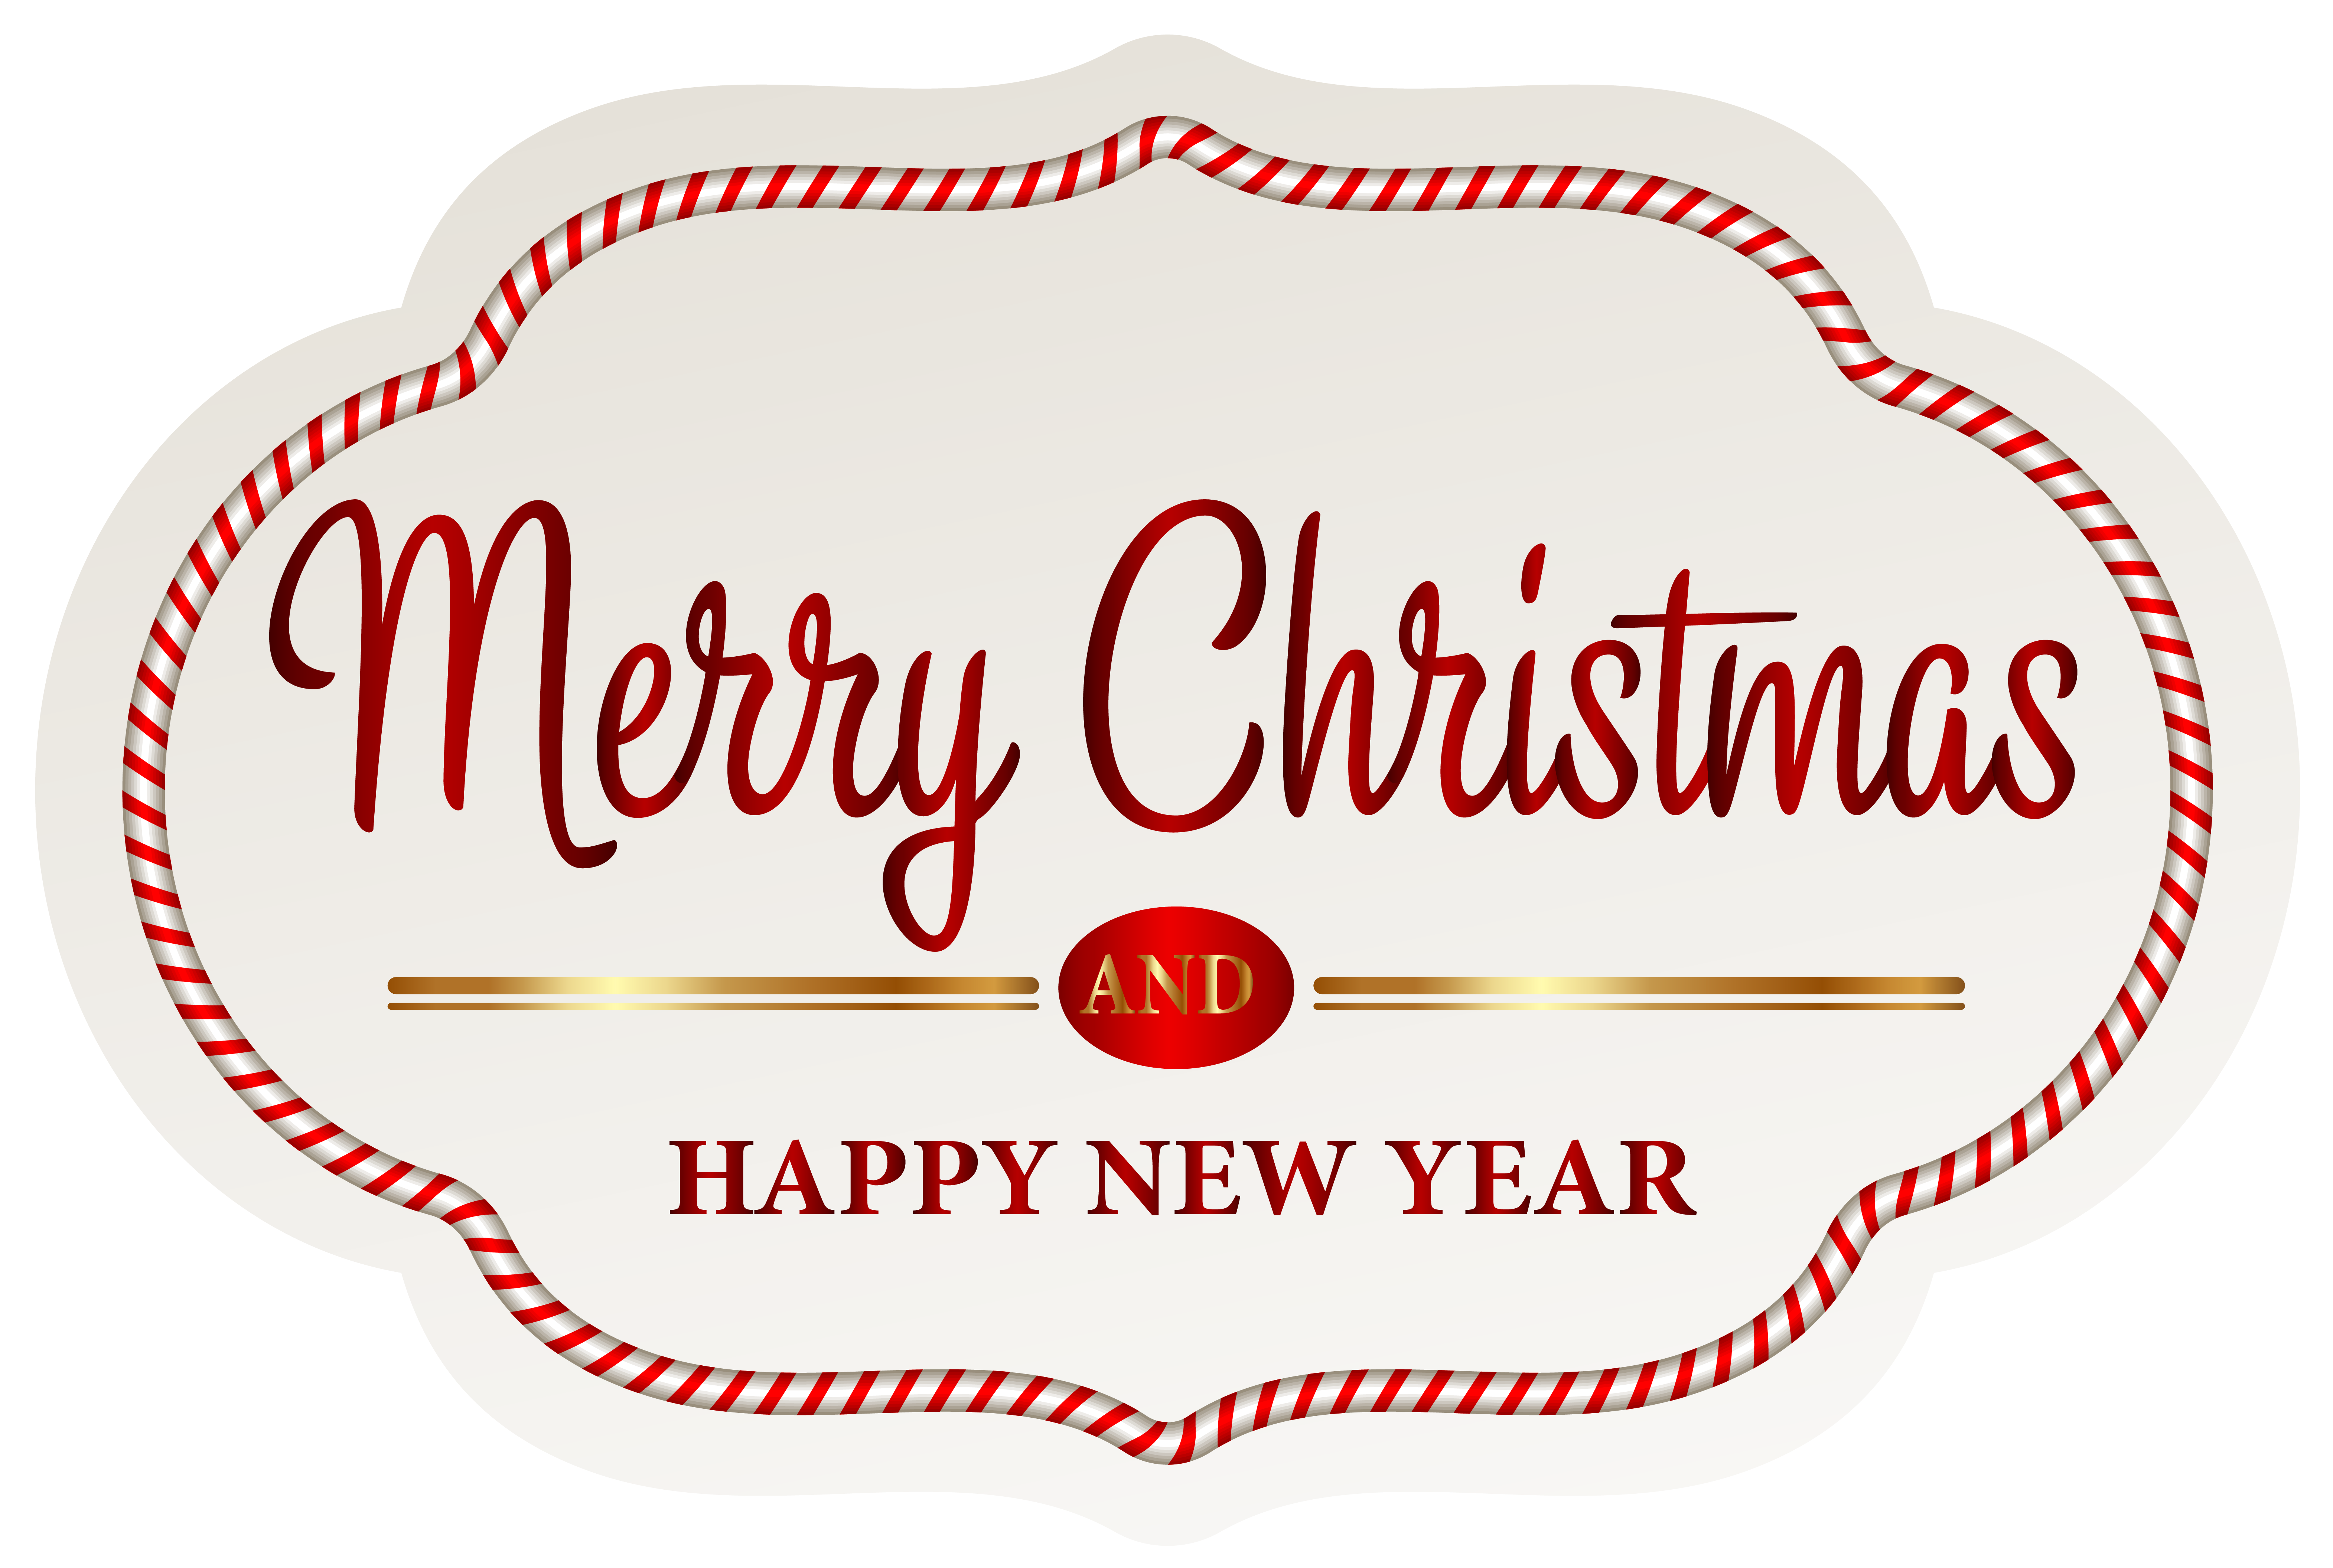 Merry Christmas Label PNG Clipart Image Quality Image And Transparent PNG Free Clipart